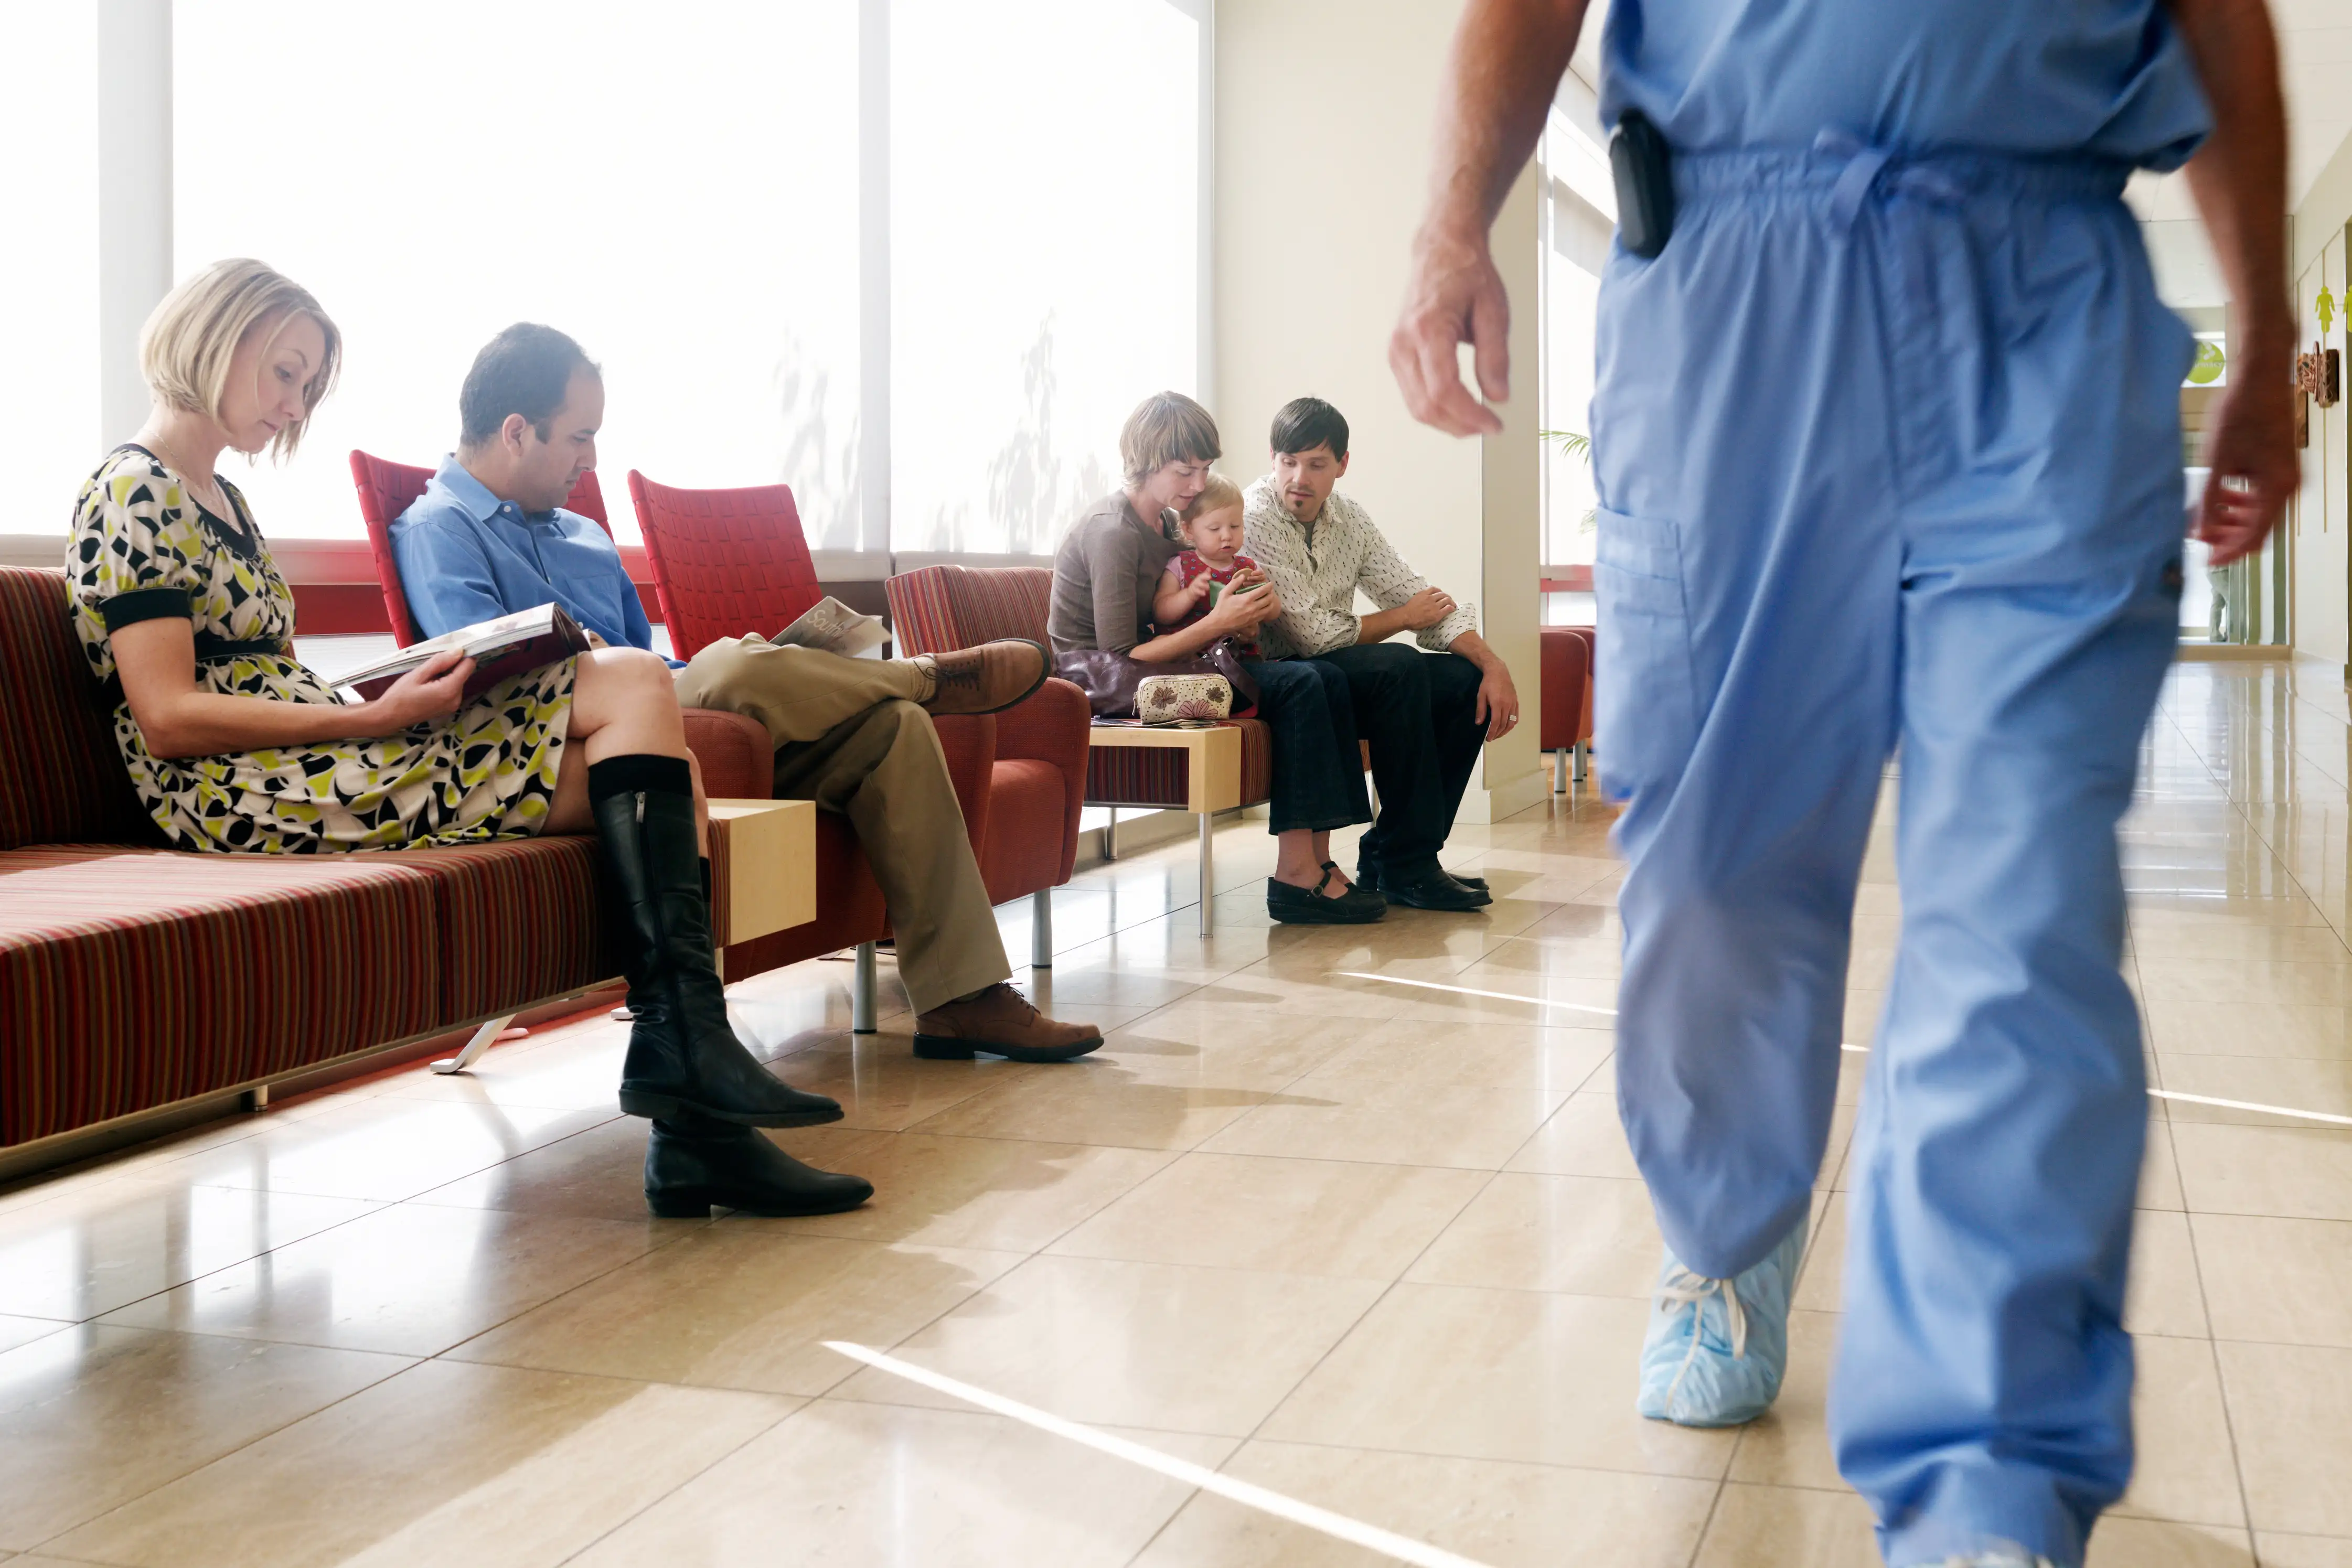 patients waiting with doctor walking past